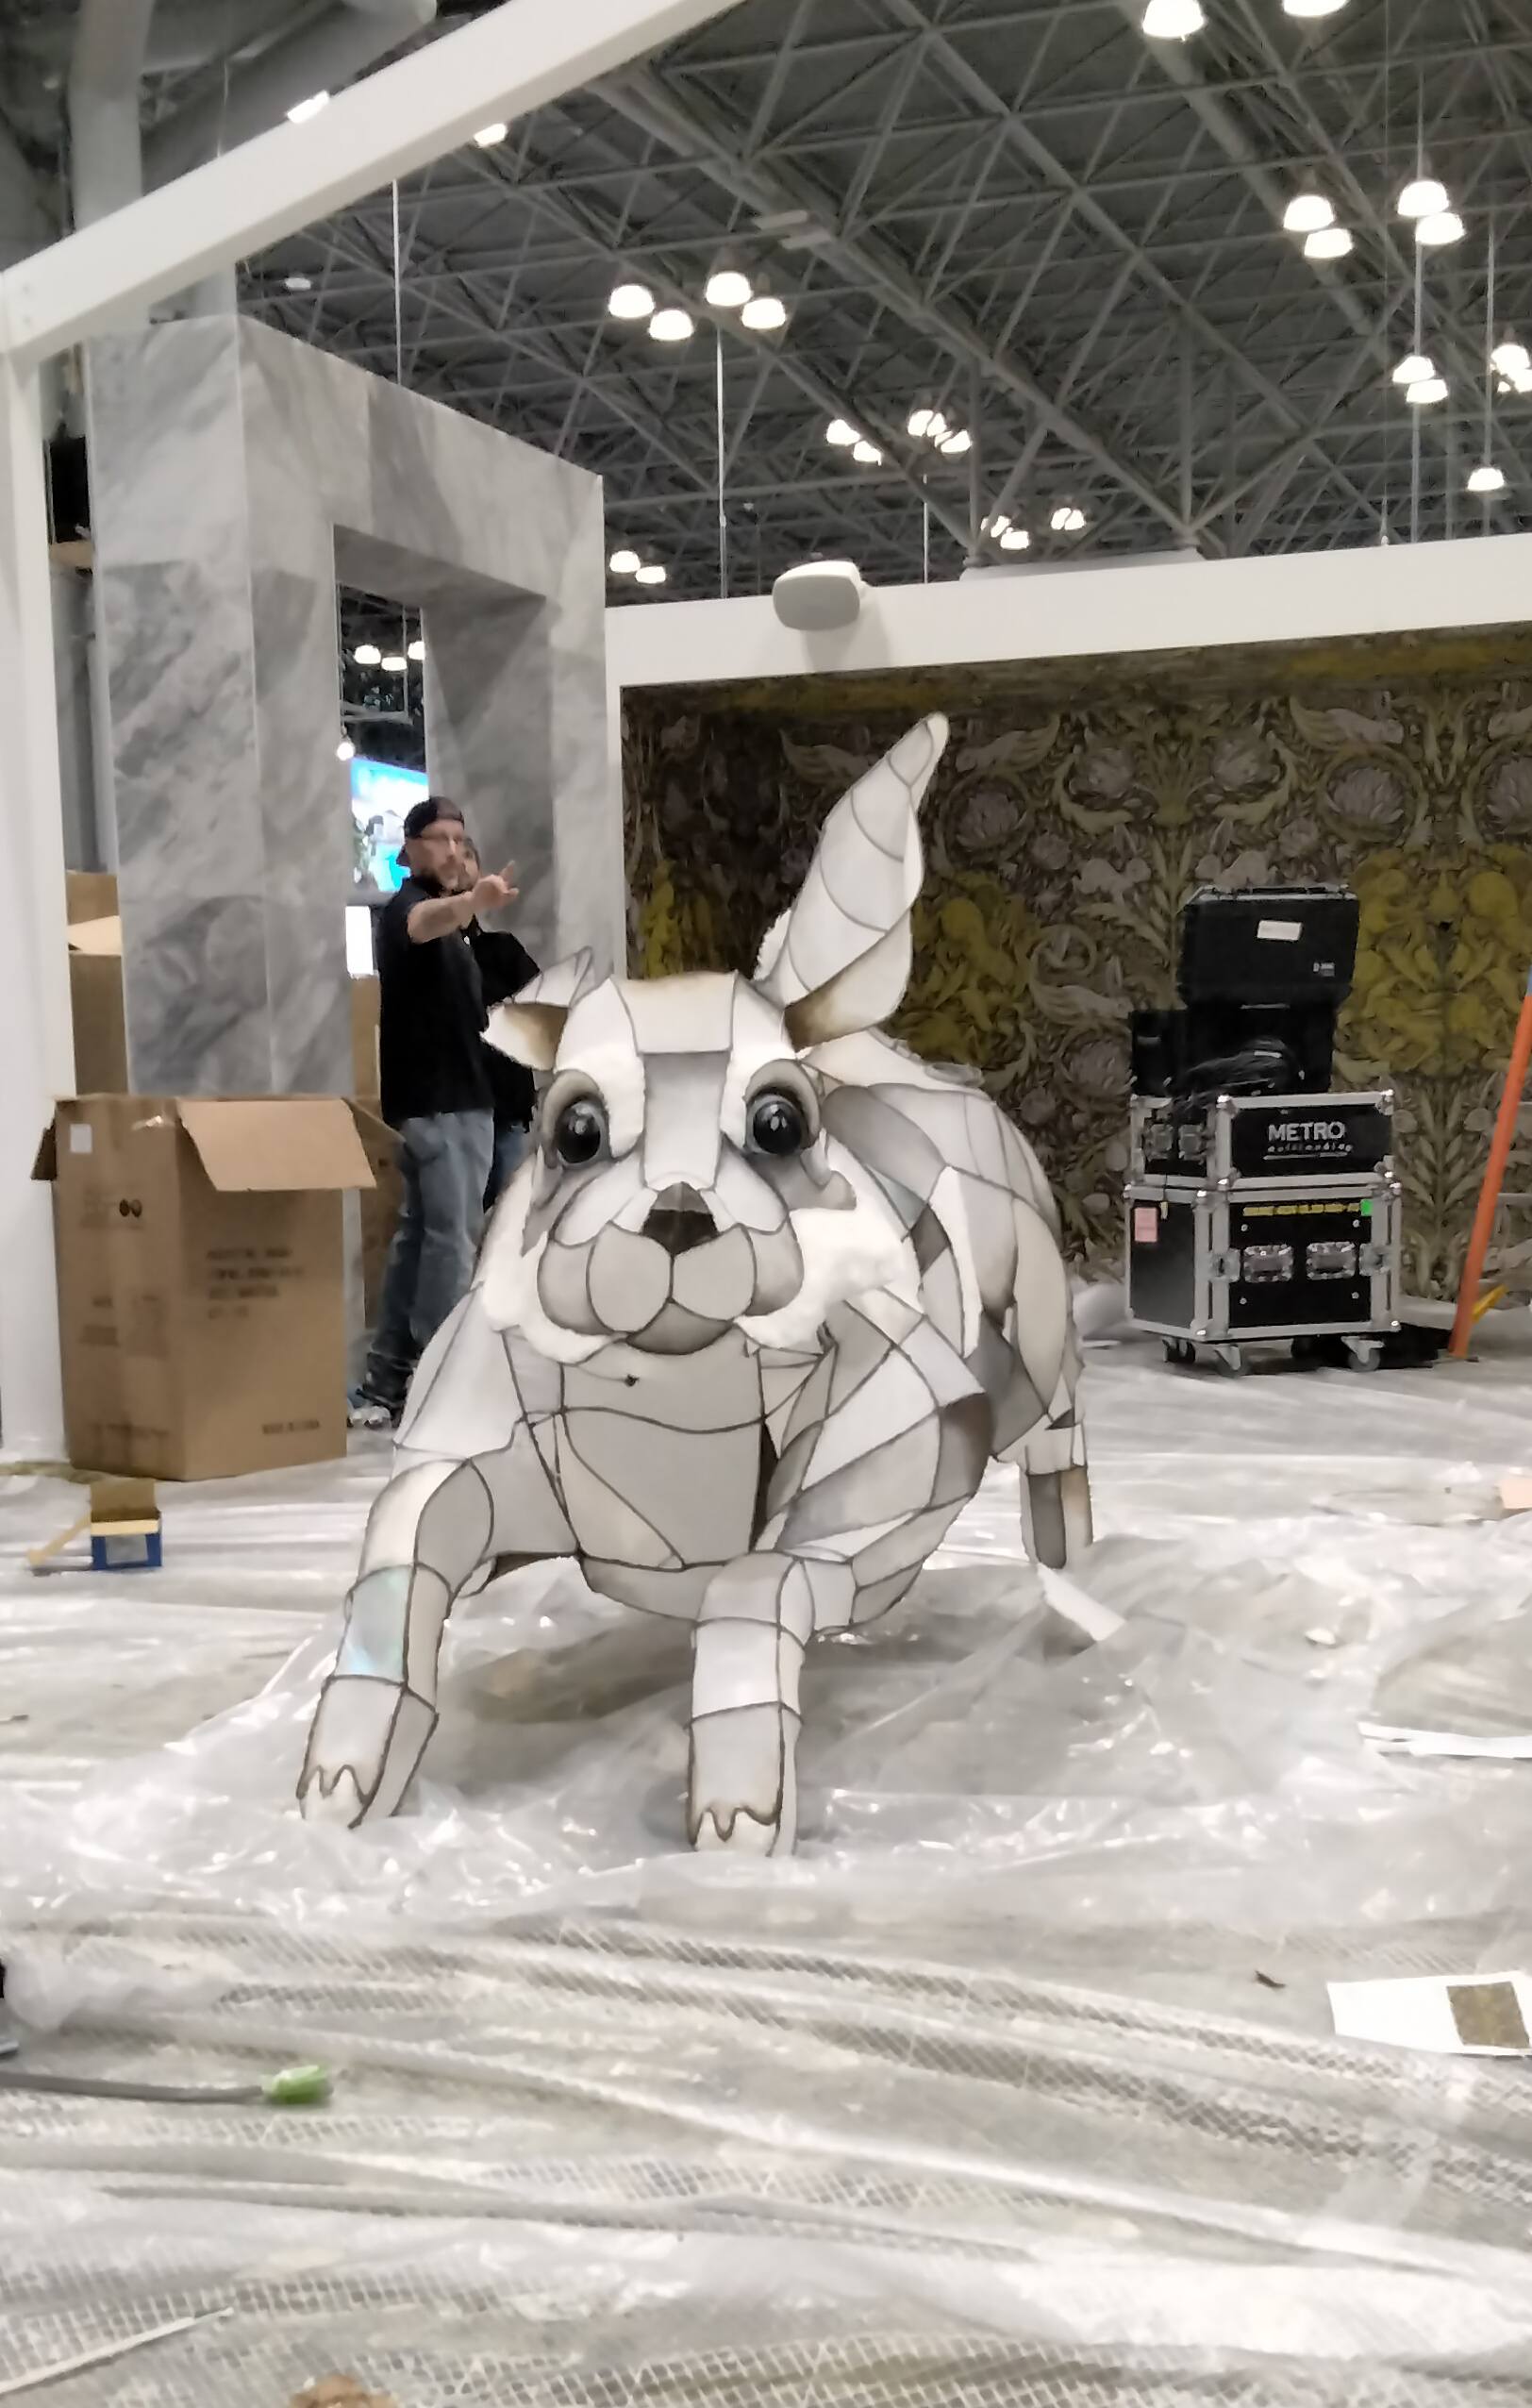 White Rabbit- Created for a Boutique Design Convention at the Javits Convention Center.